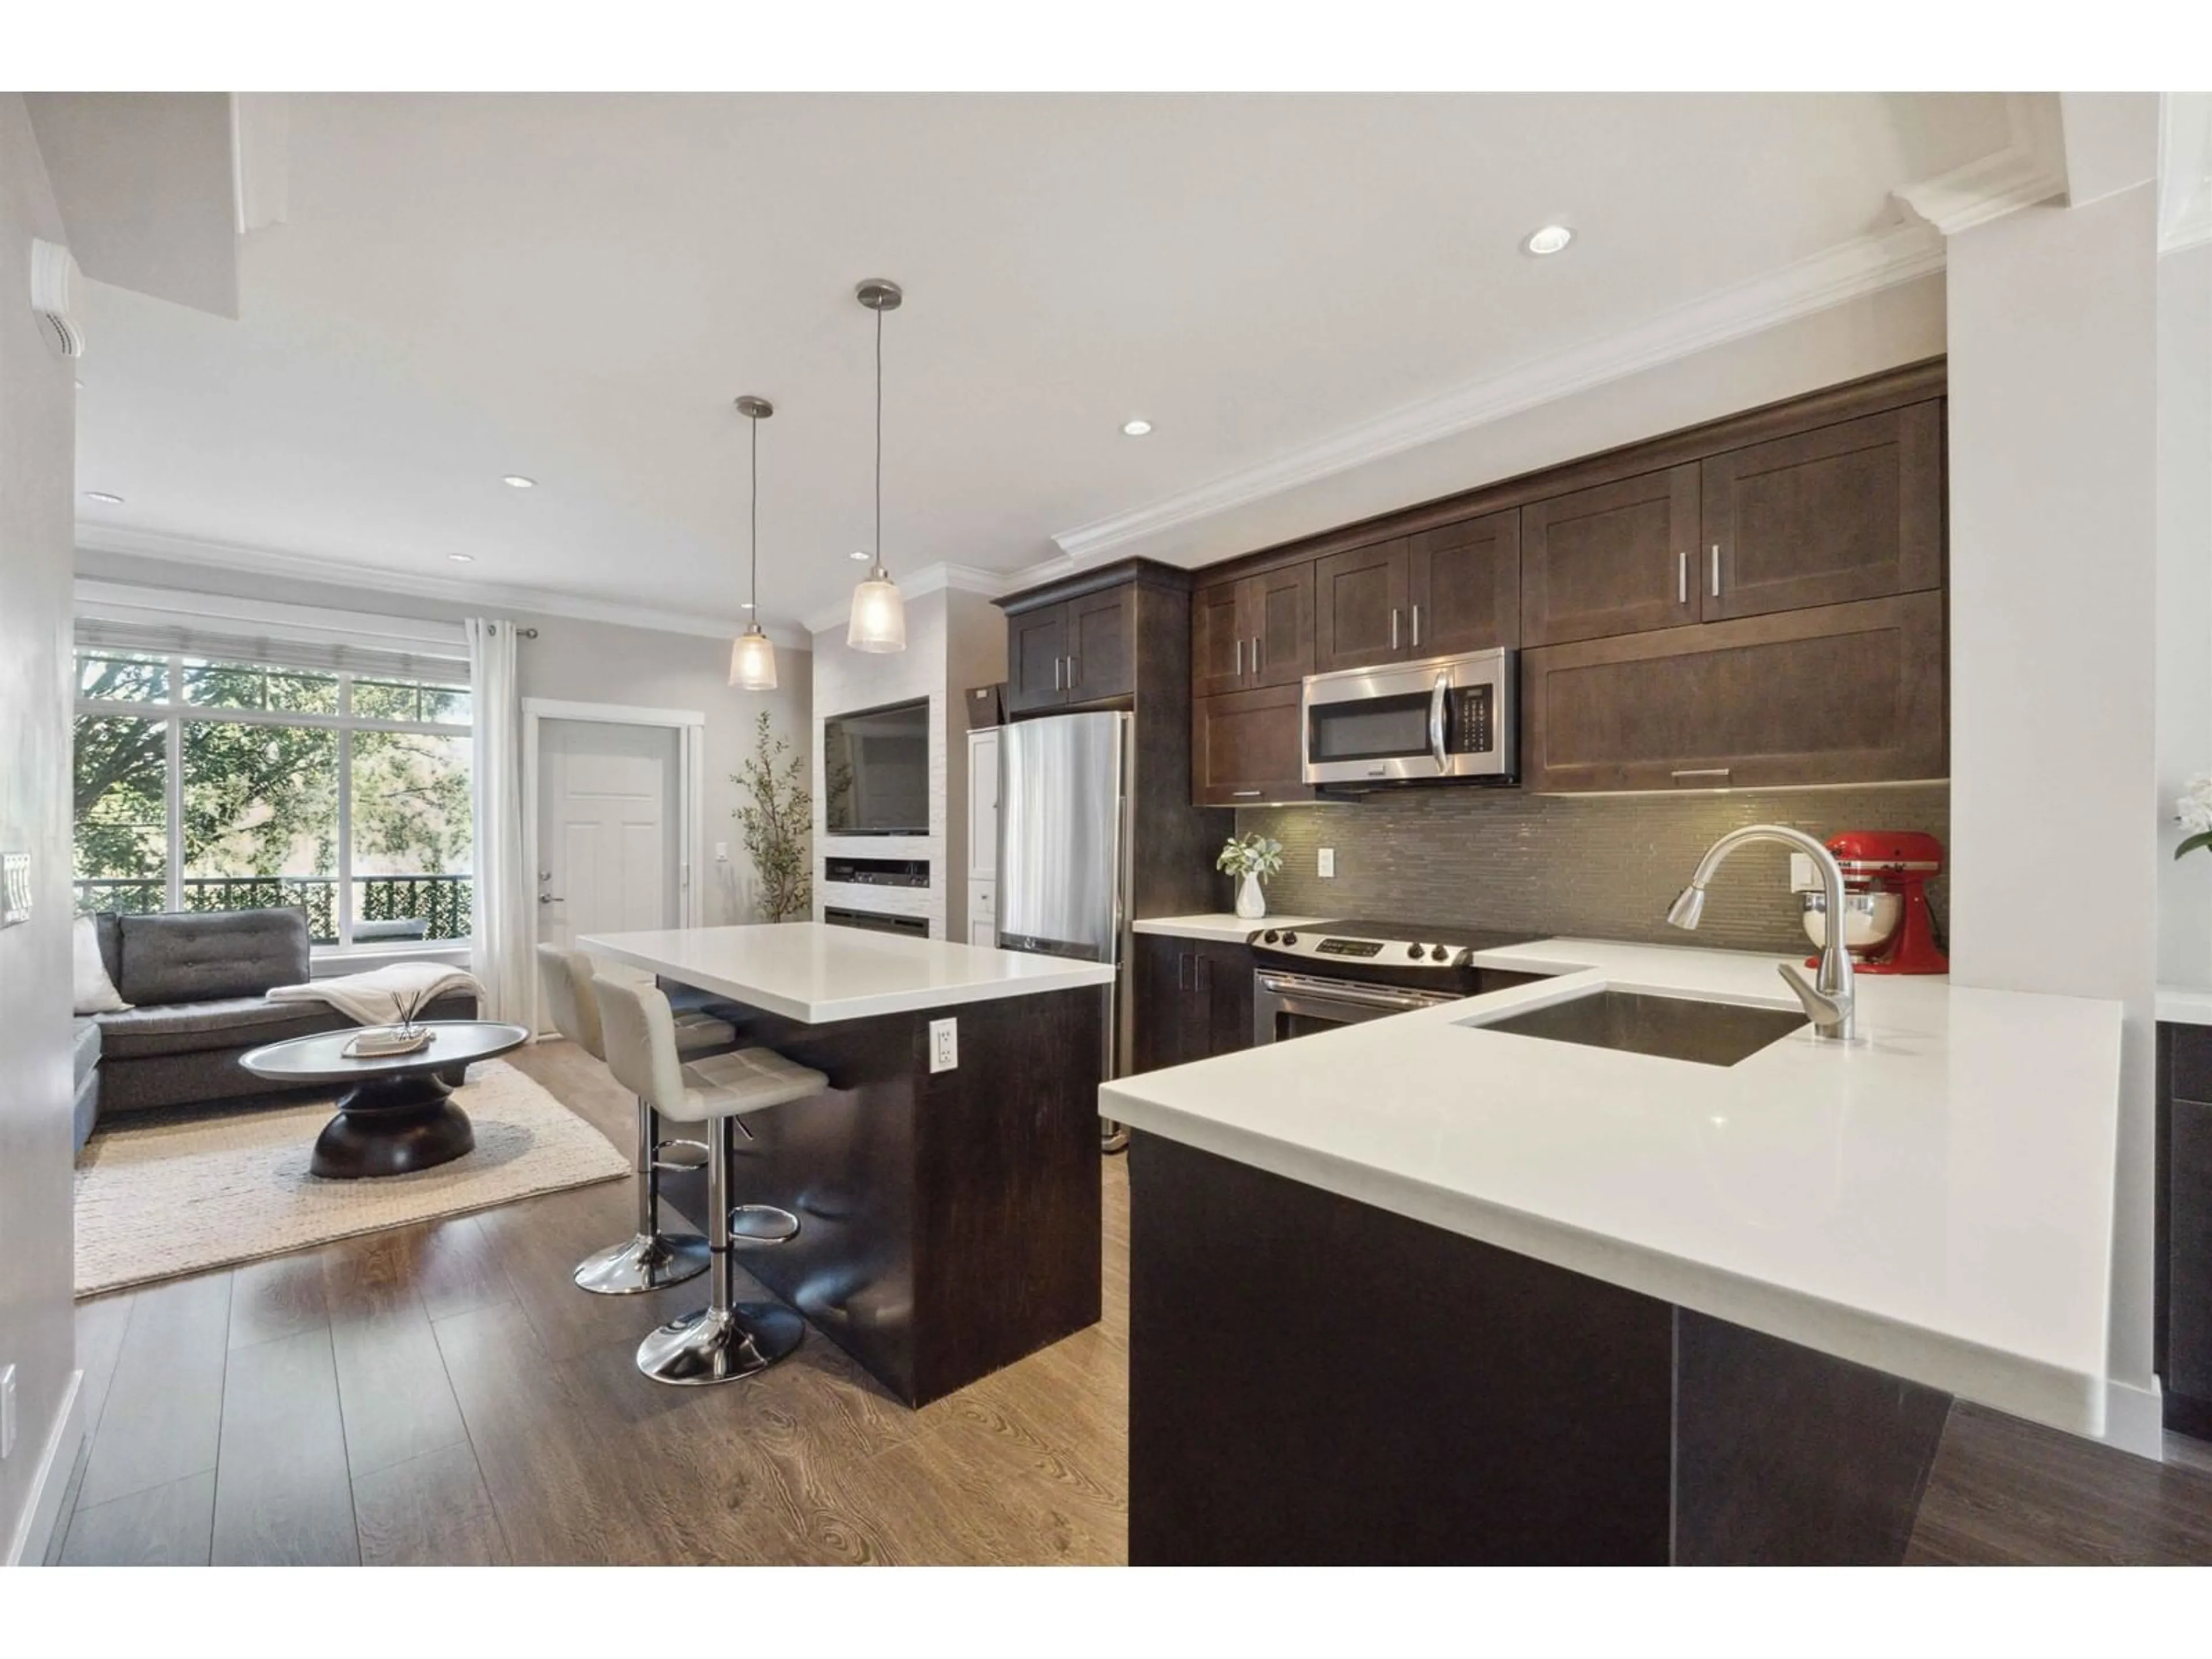 Contemporary kitchen for 49 7090 180 STREET, Surrey British Columbia V3S3T9